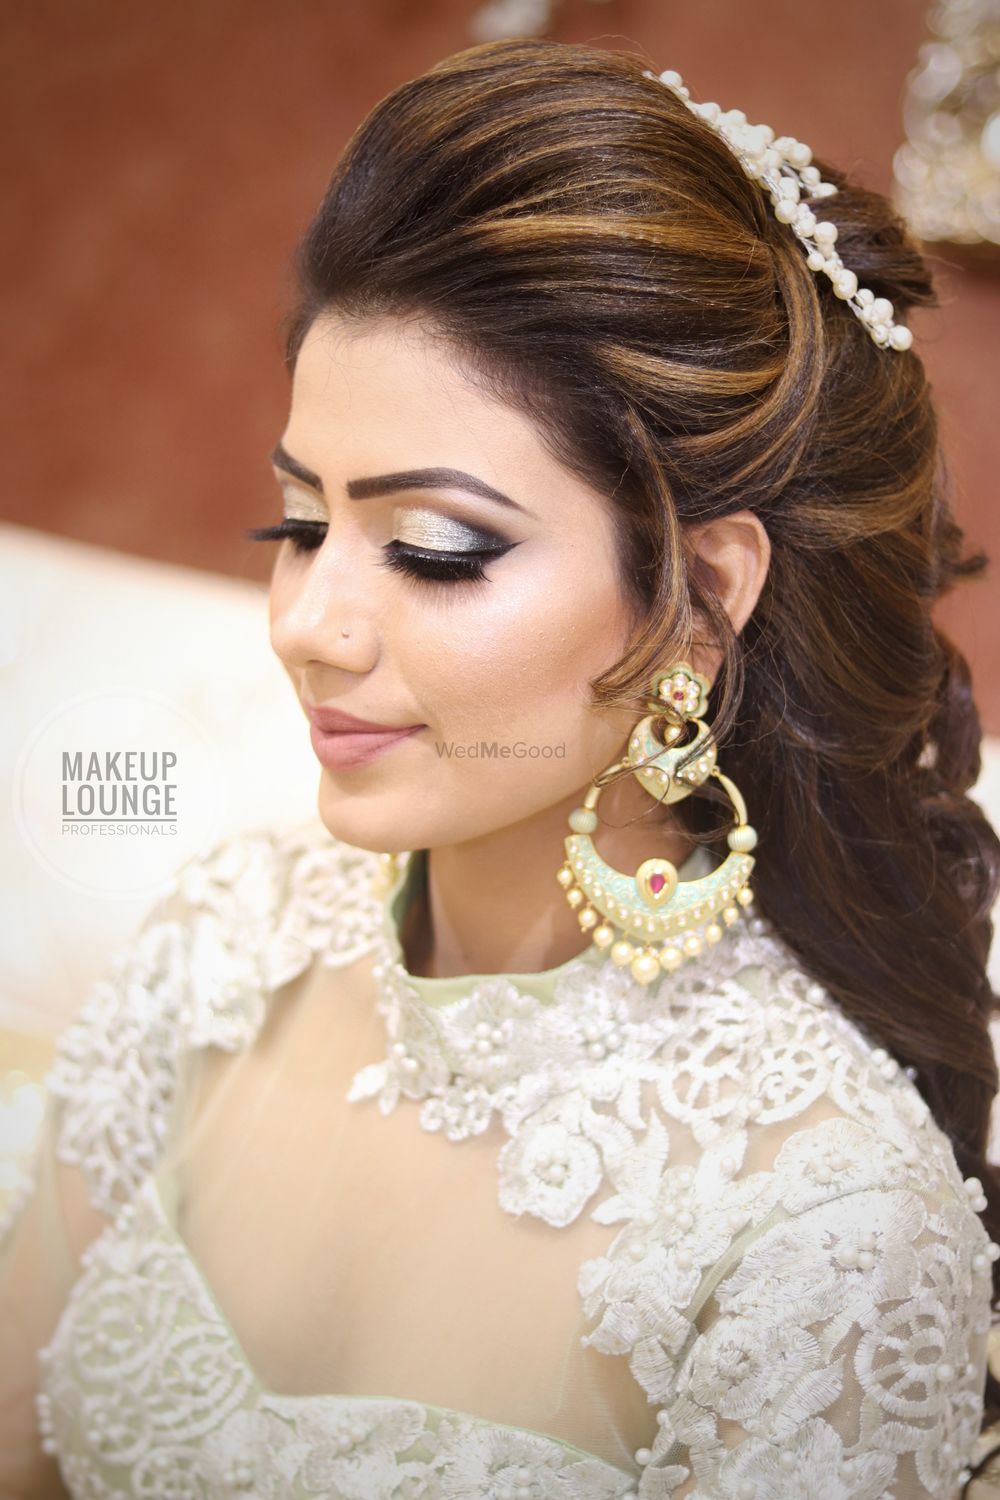 Photo From makeup 2019 - By Makeup Lounge